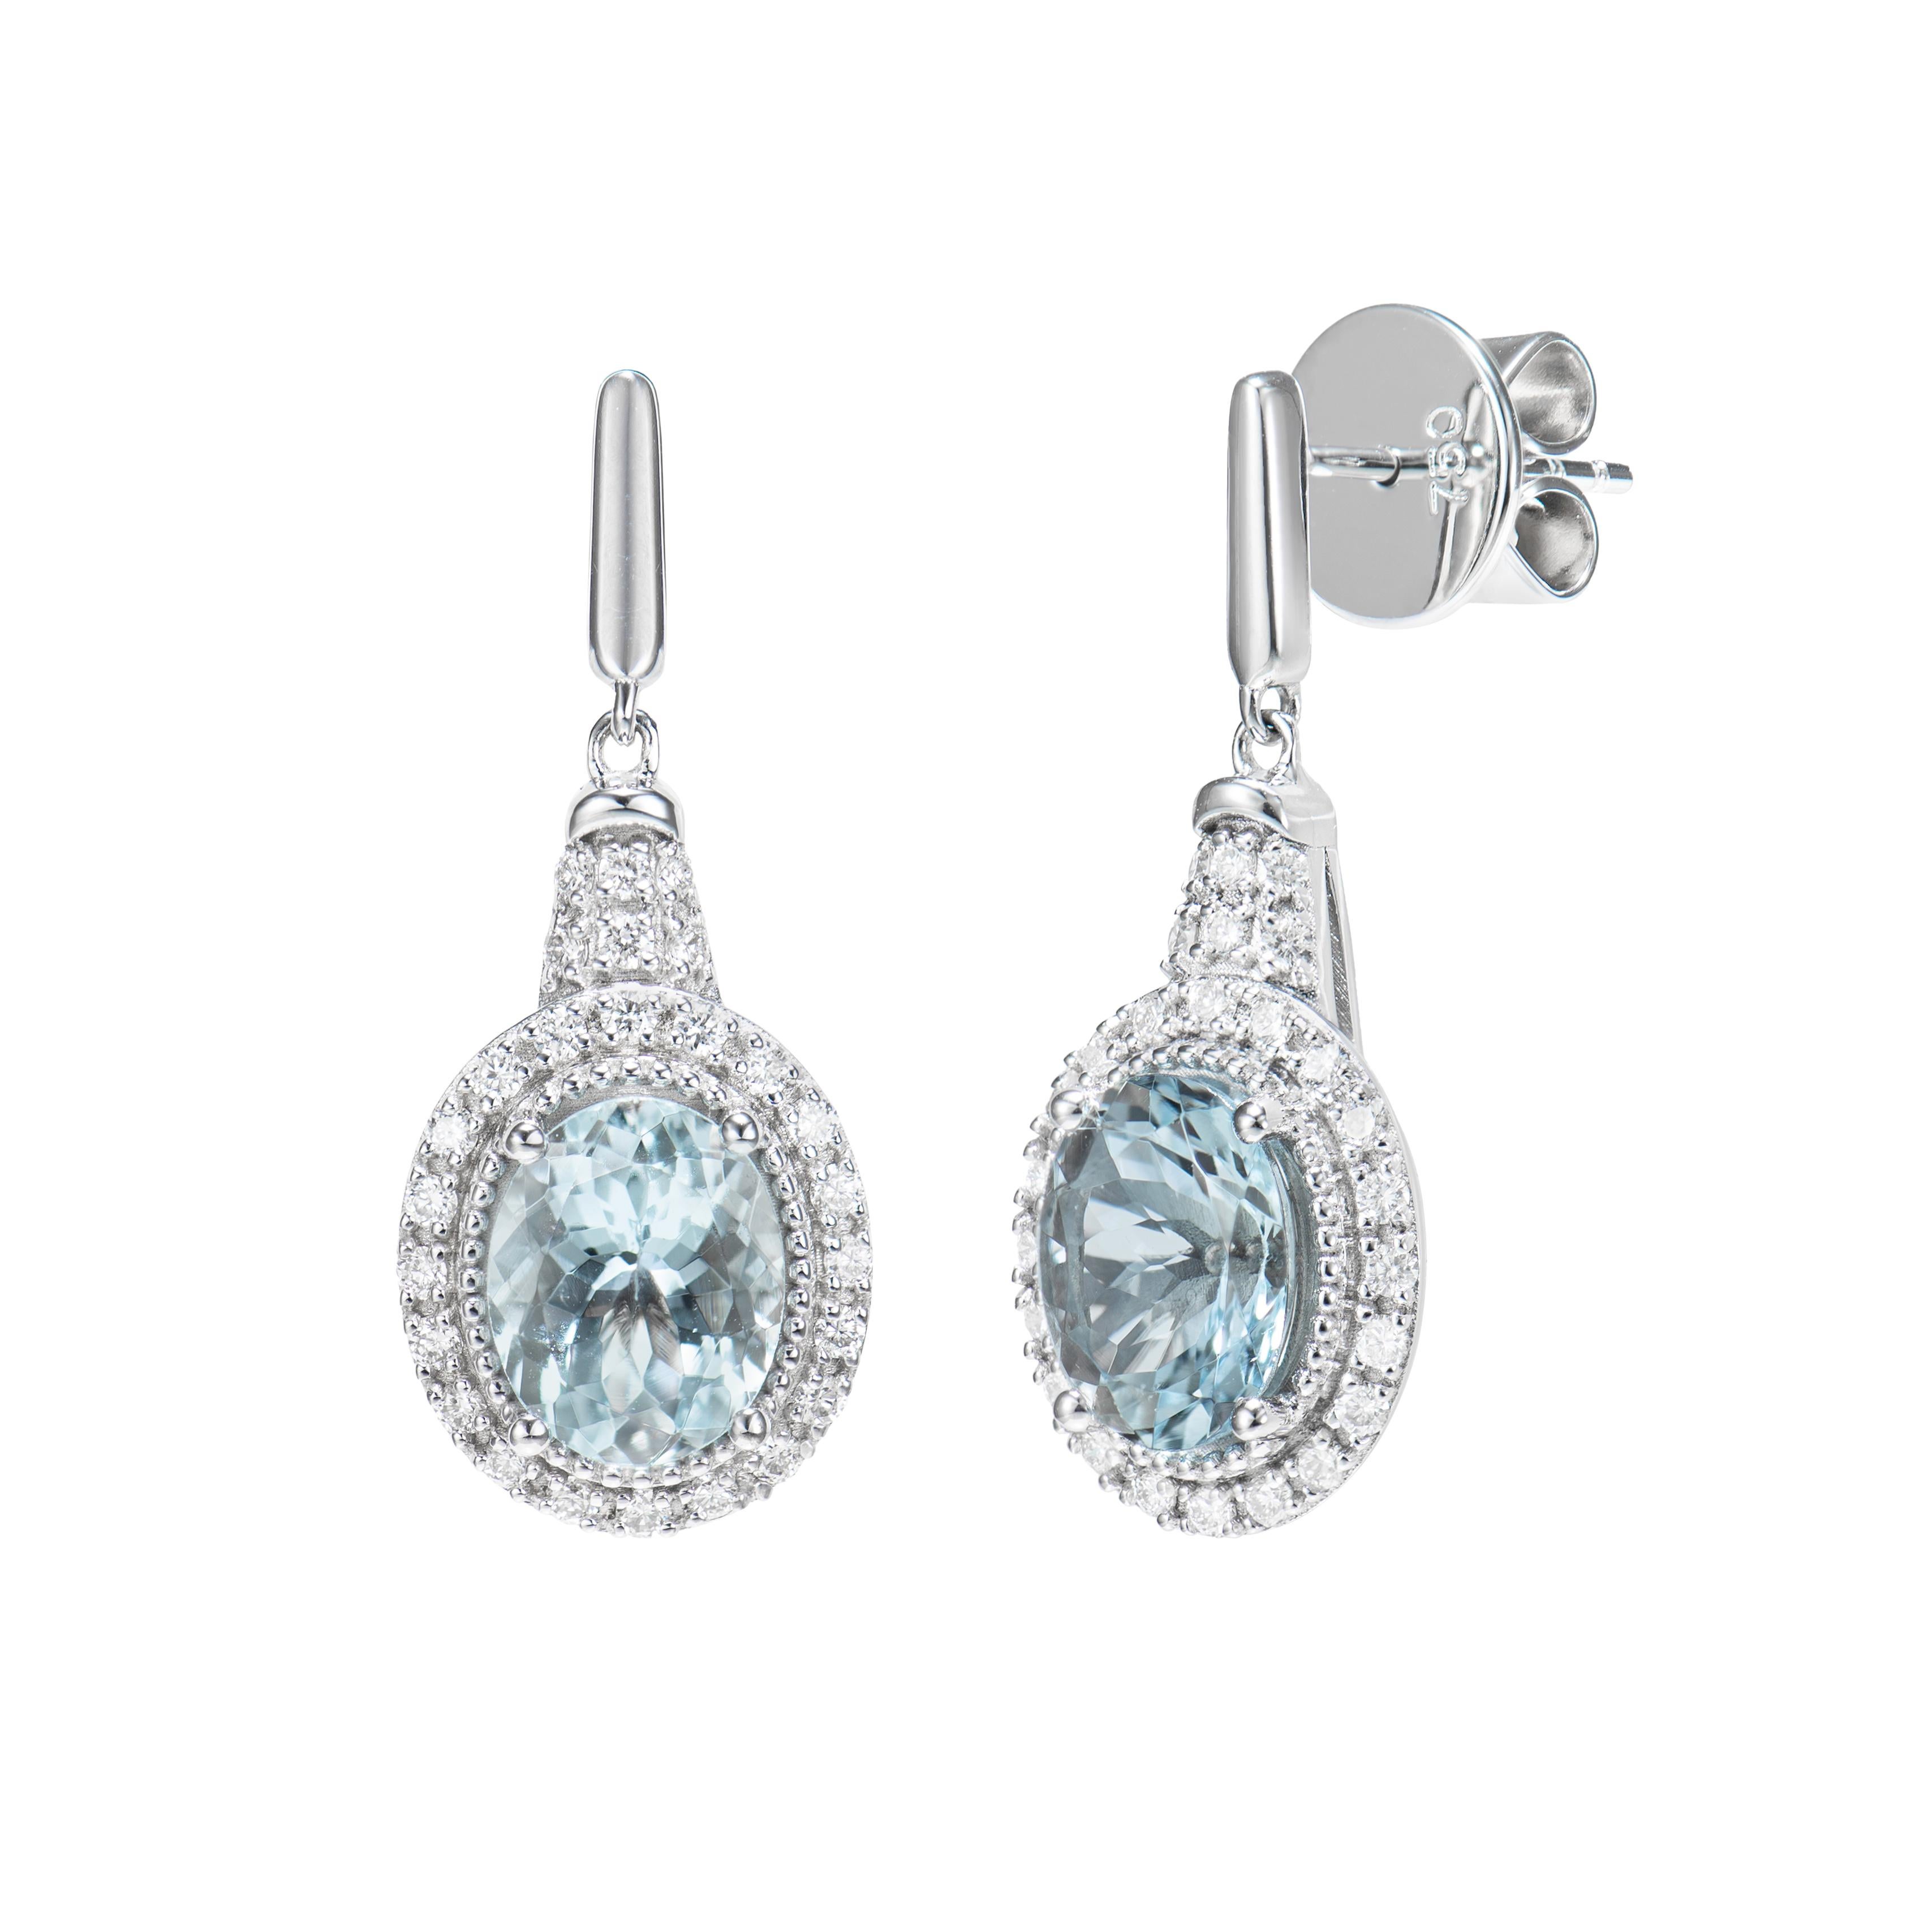 Oval Cut Aquamarine and White Diamond Drops Earring in 18 Karat White Gold. For Sale